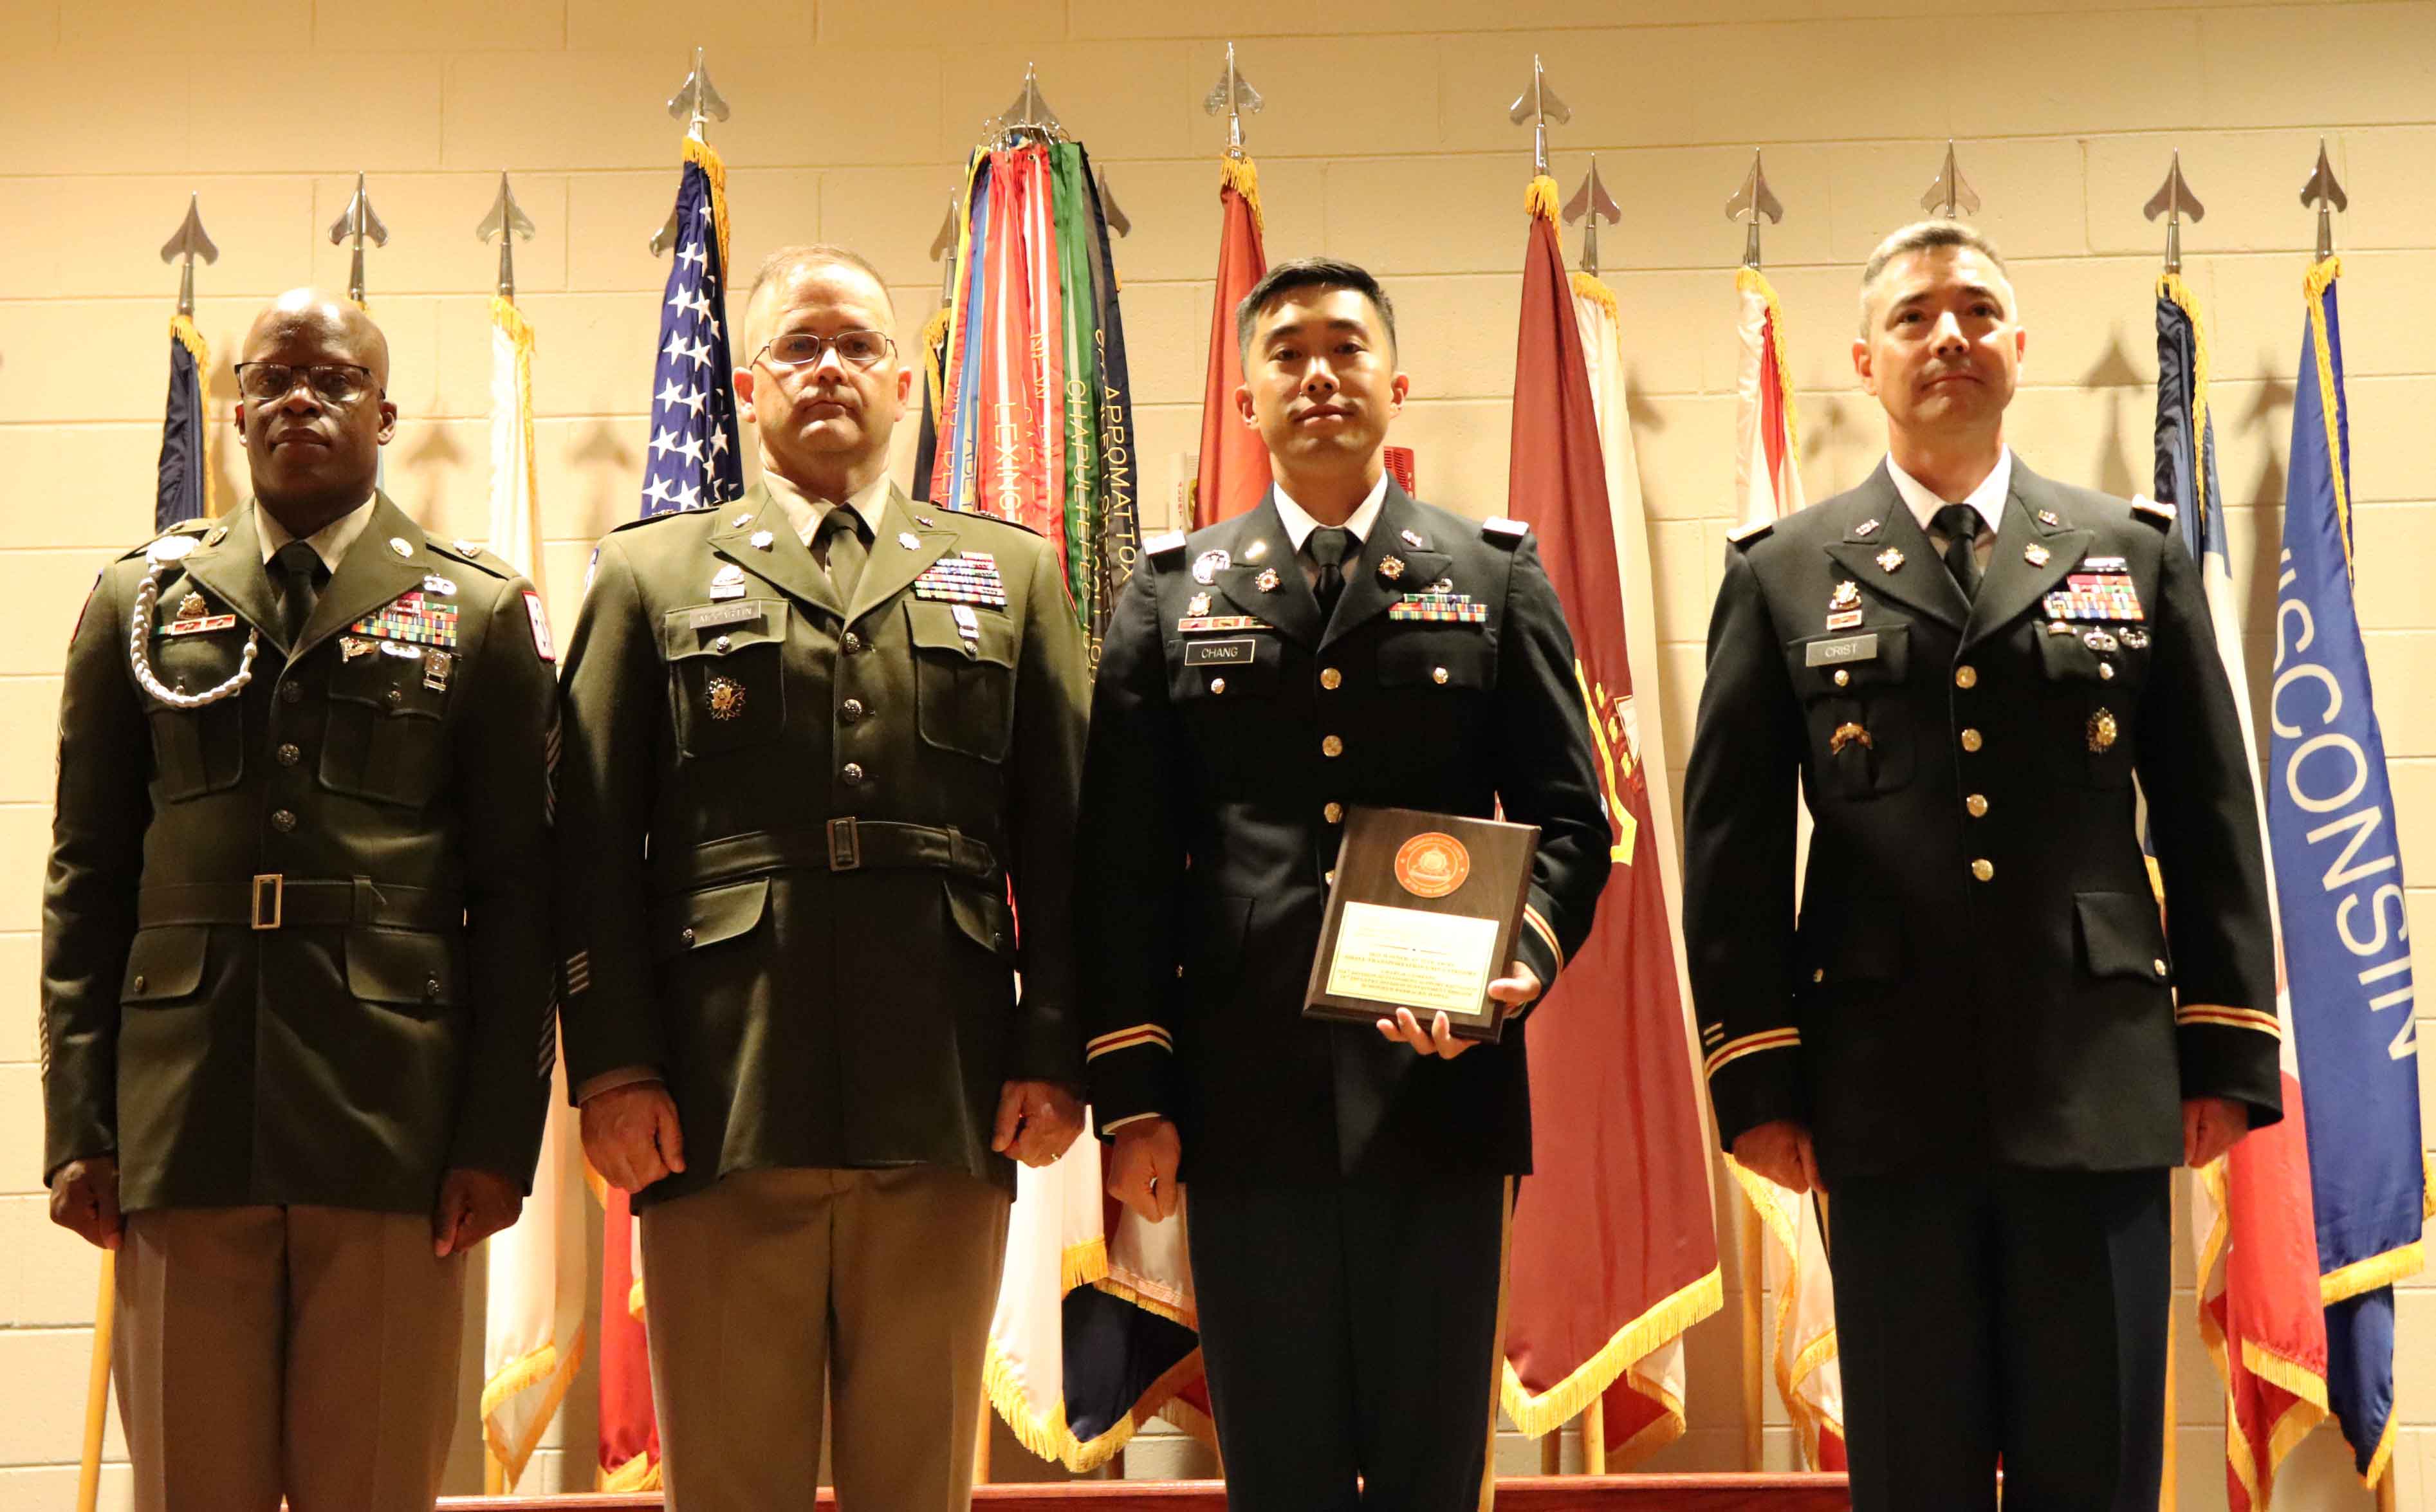 CPT Andrew Chang, Commander of Charlie Company, 524th DSSB accepts the award on behalf of his unit.